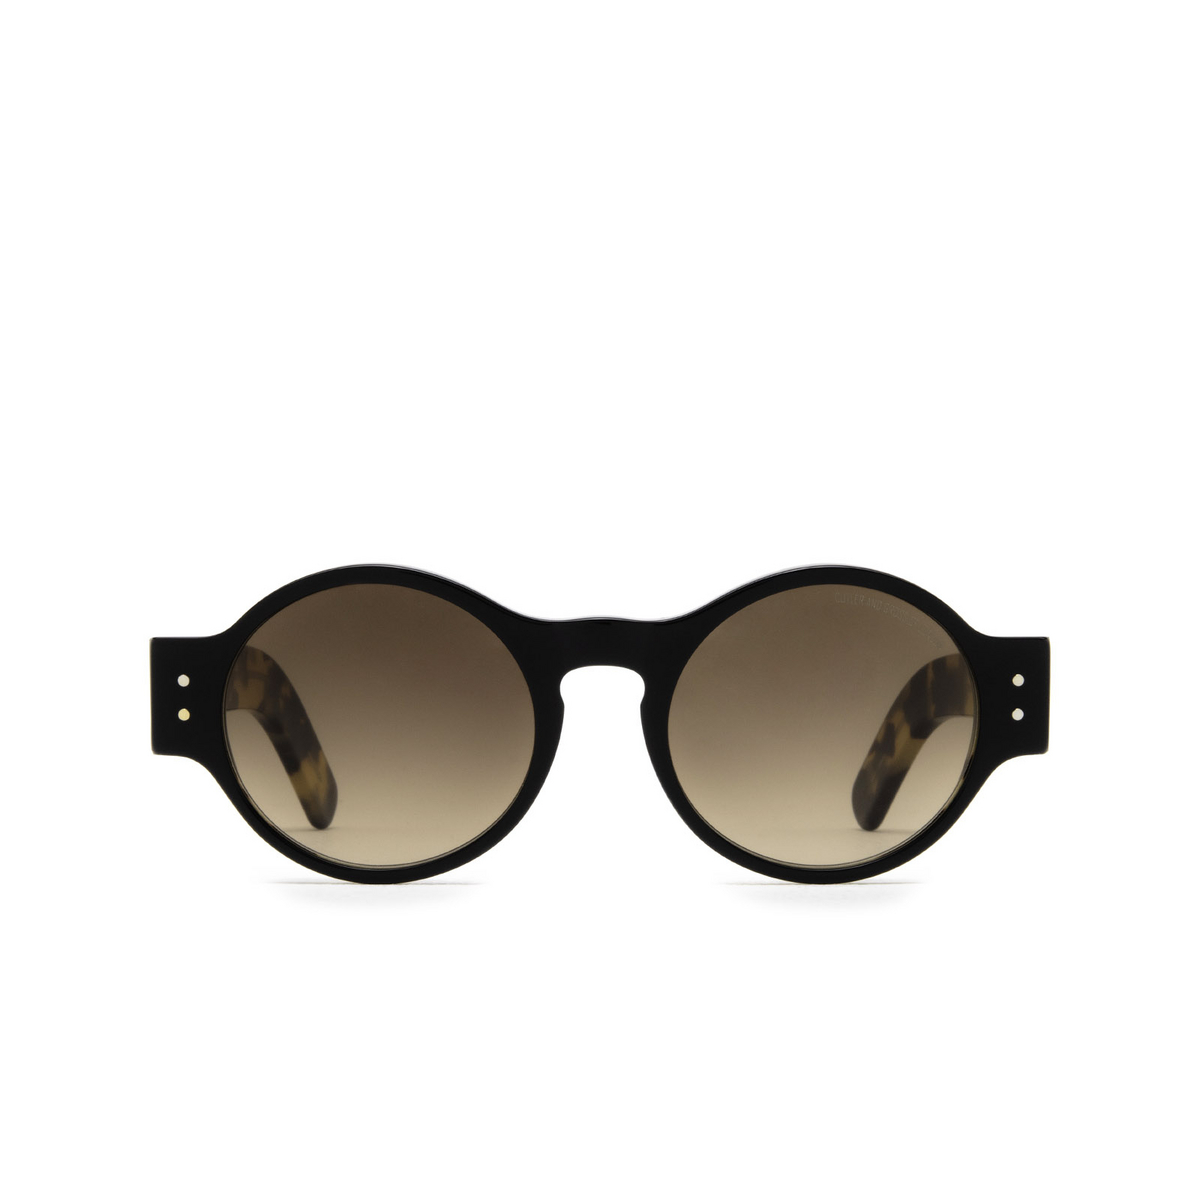 Cutler and Gross® Round Sunglasses: 1374 SUN color Black On Camo 02 - front view.